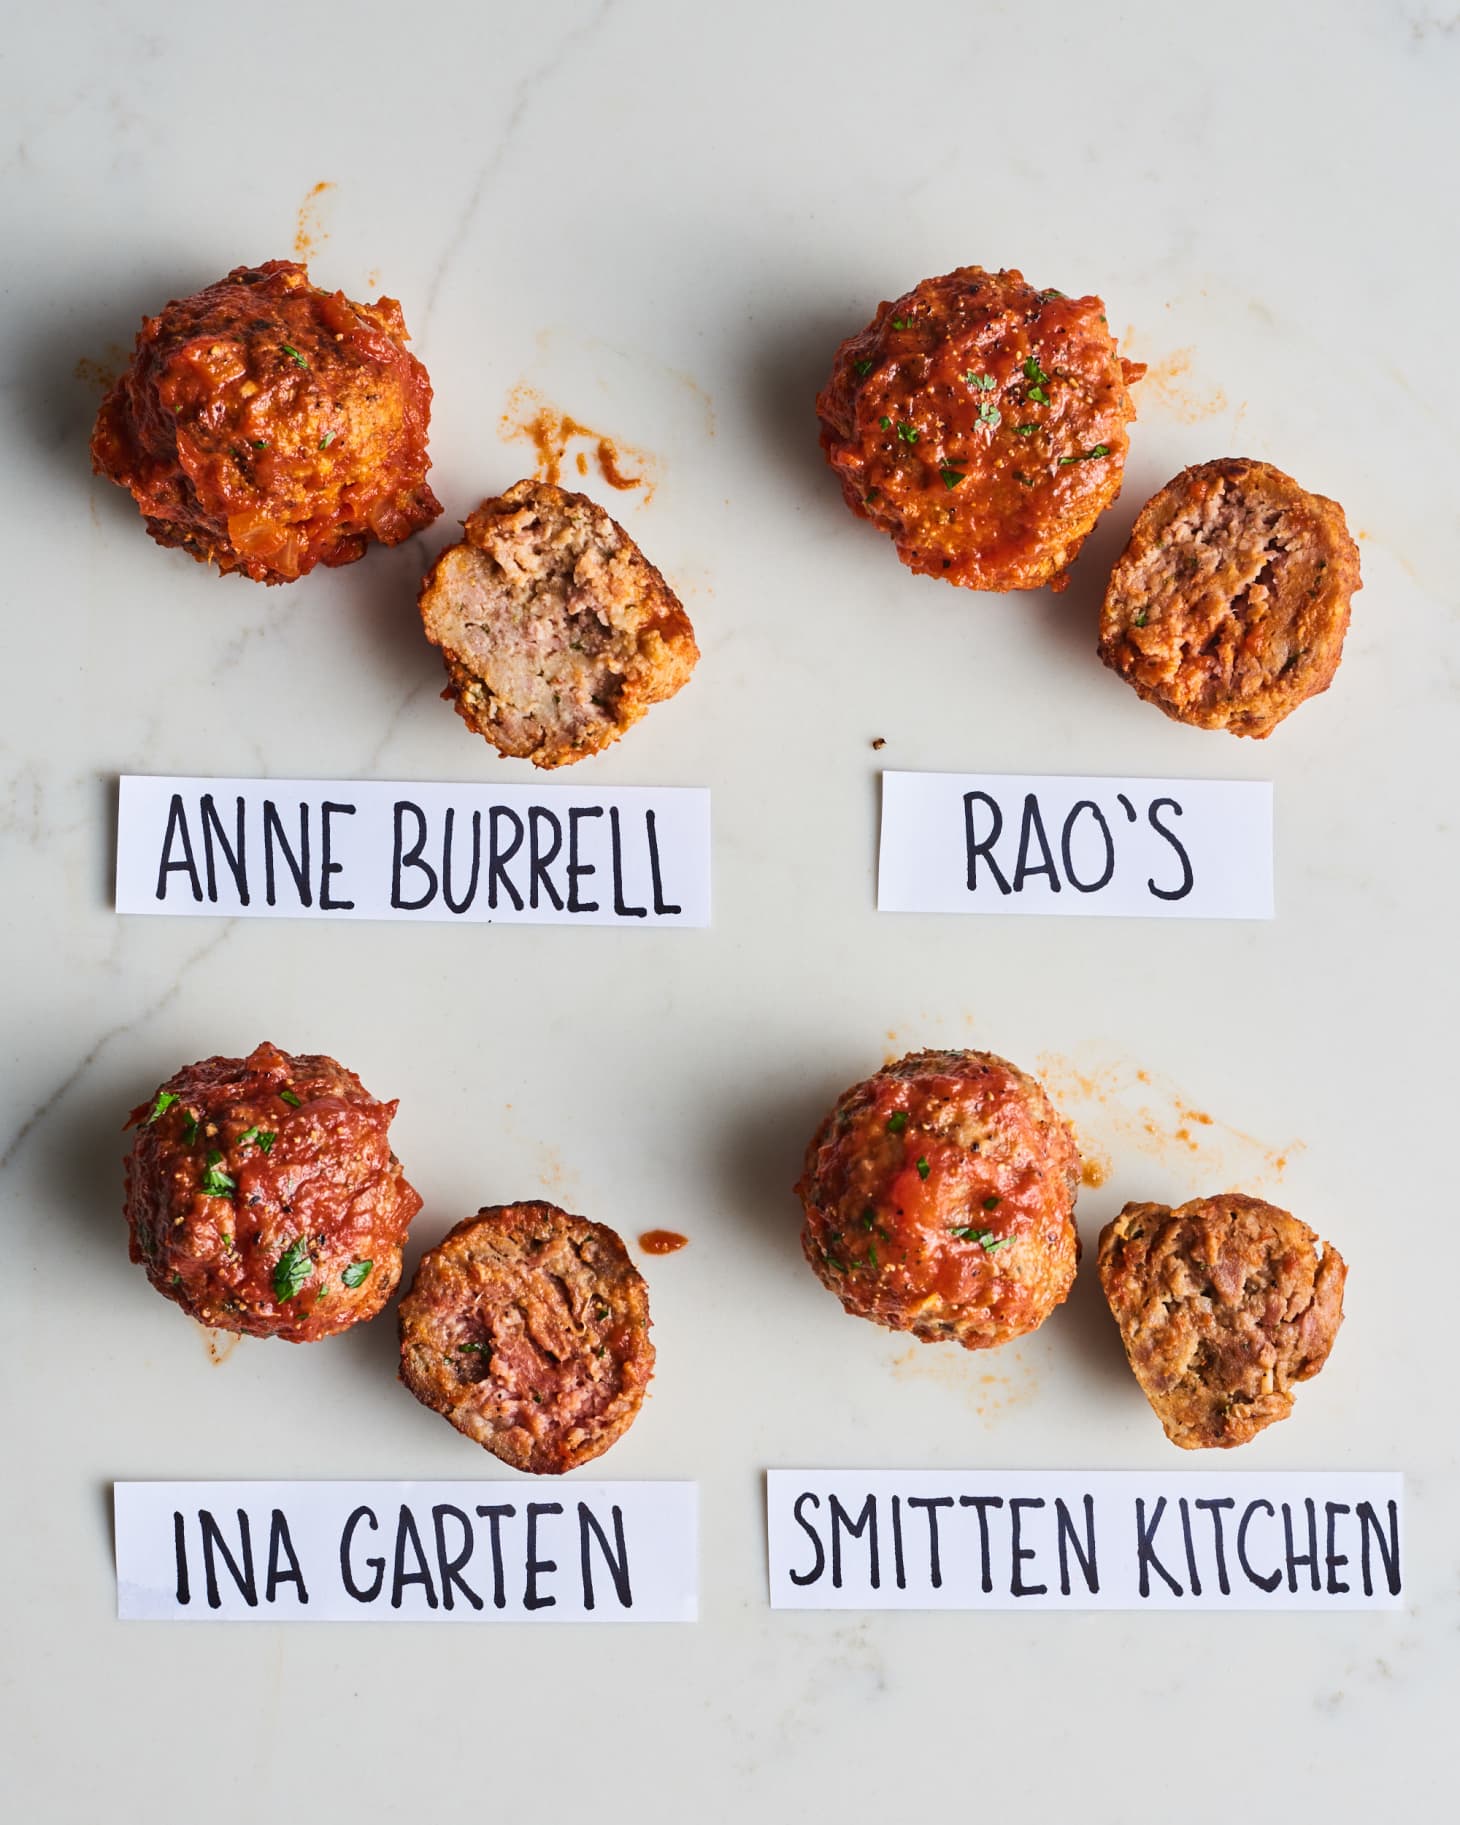 Meatball Recipe With Stove Top Stuffing